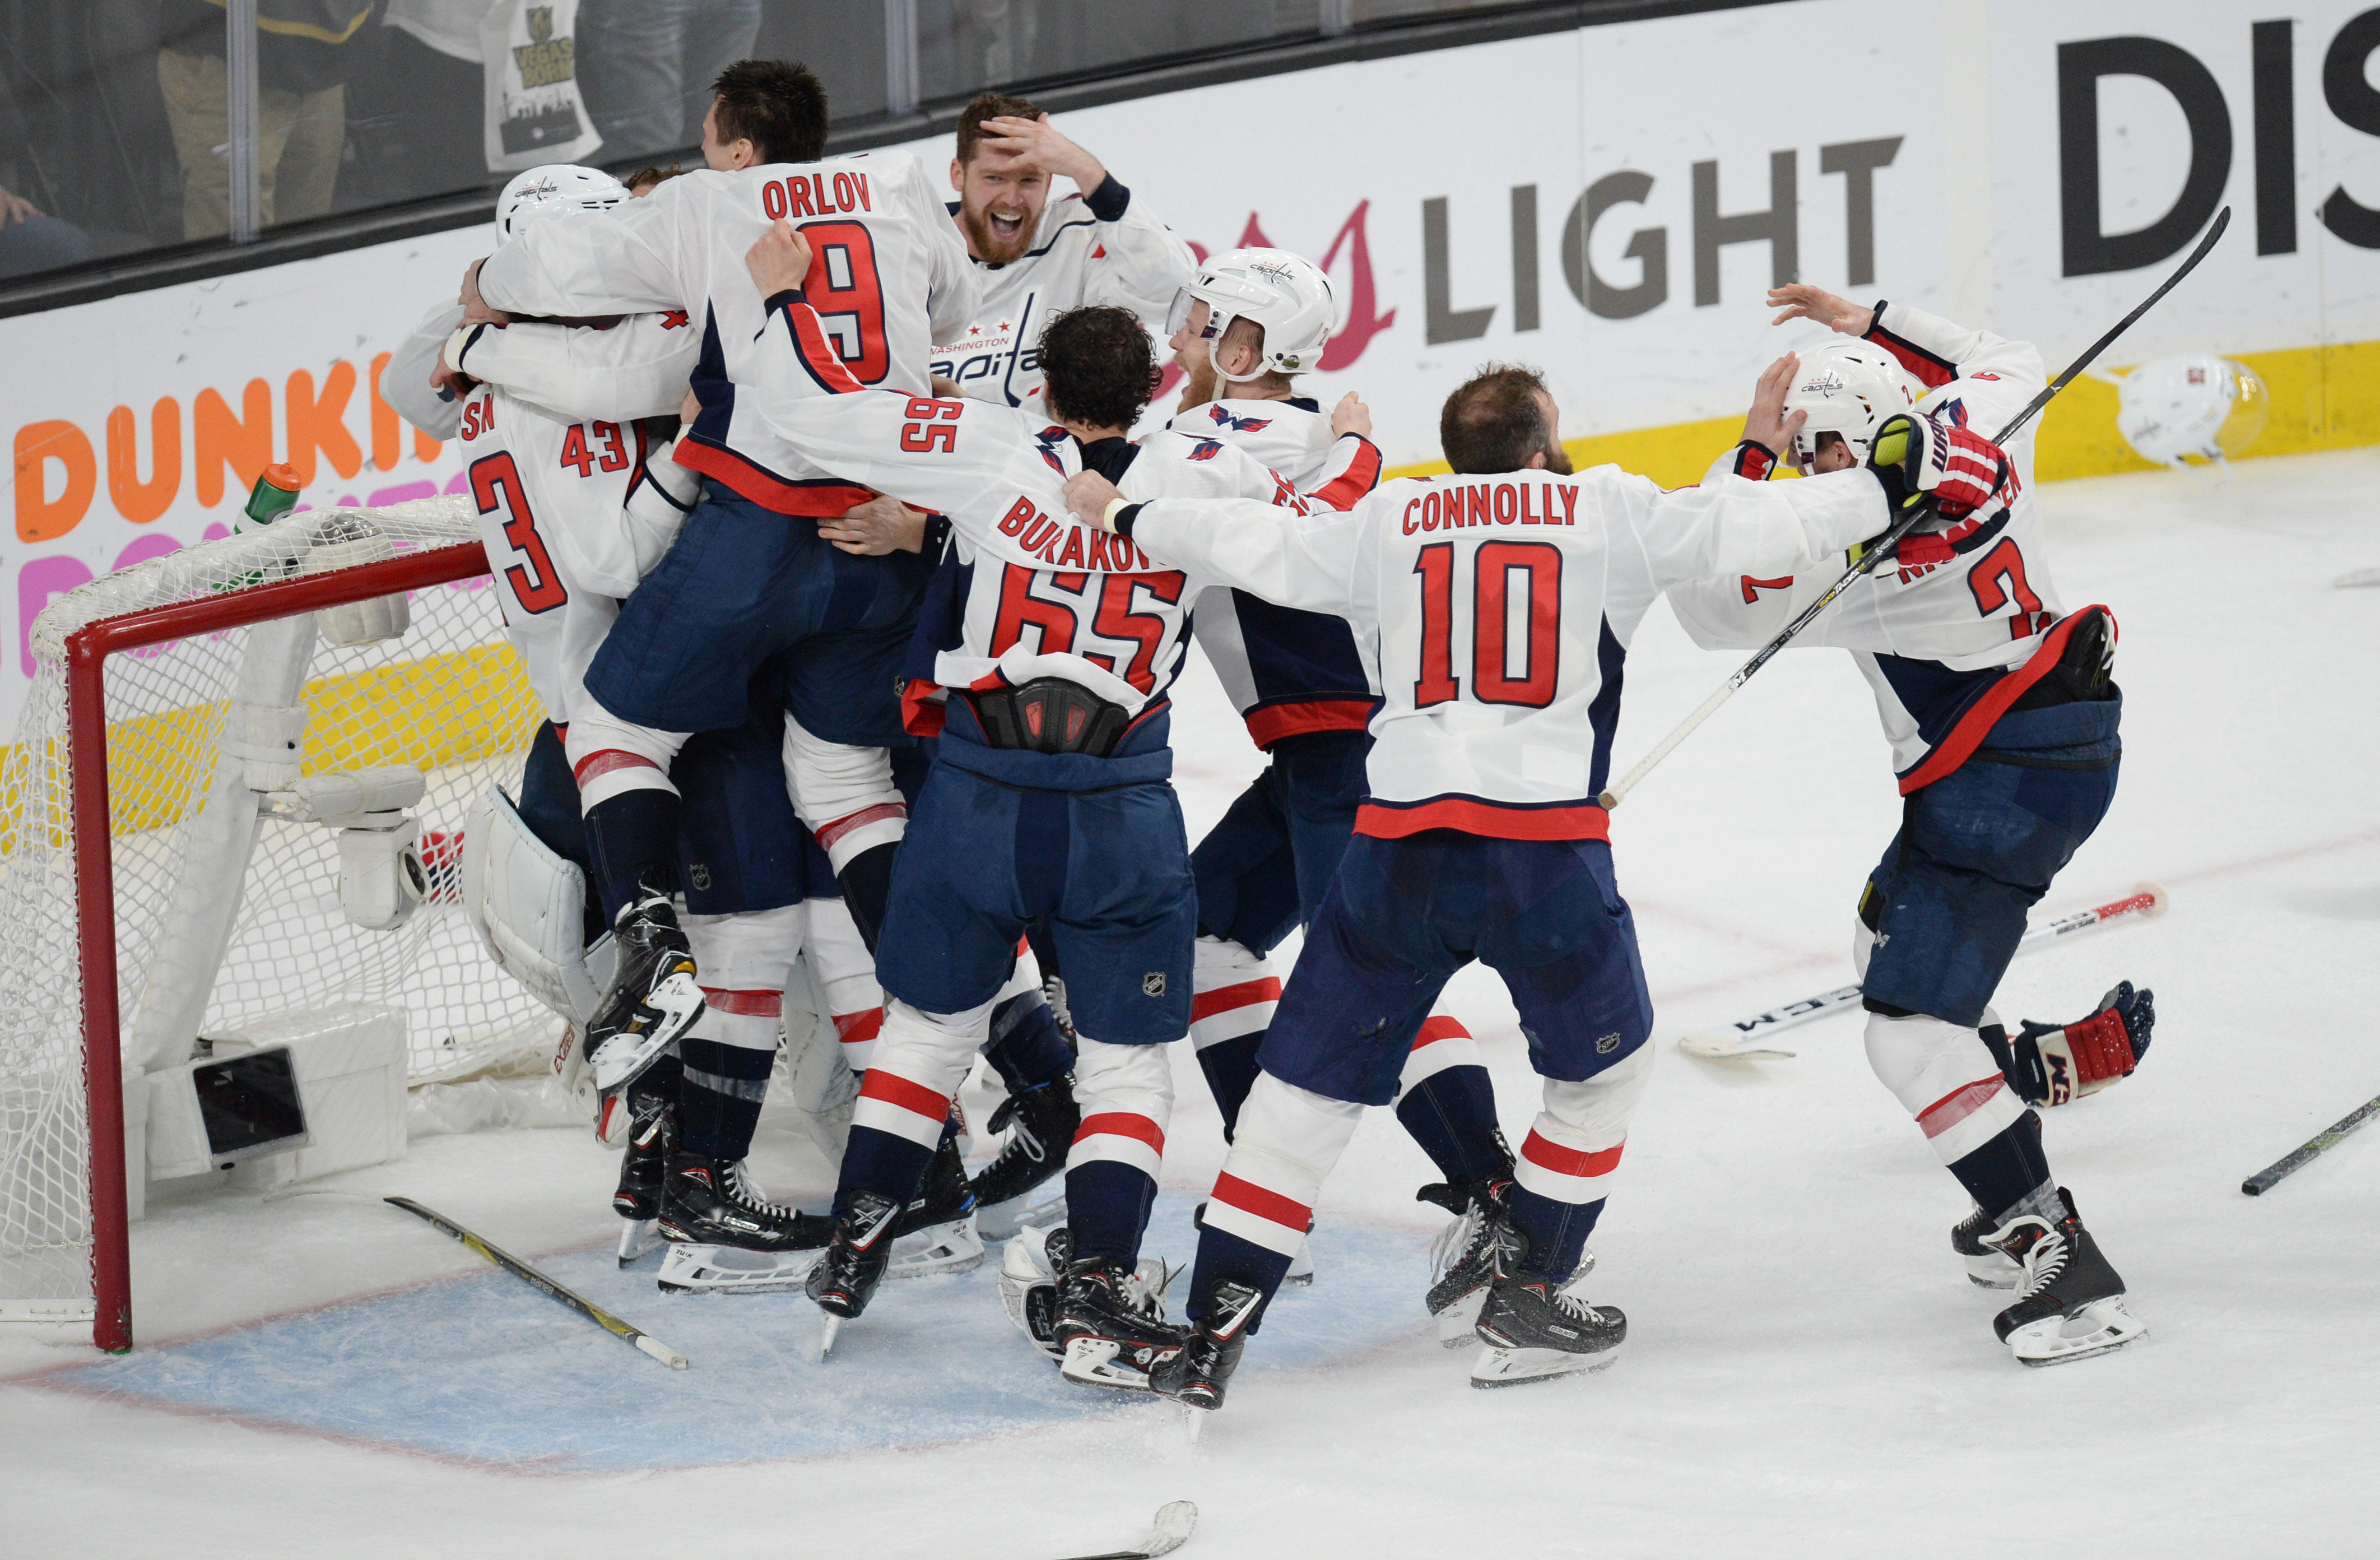 Washington Capitals beat Vegas Golden Knights to win Stanley Cup